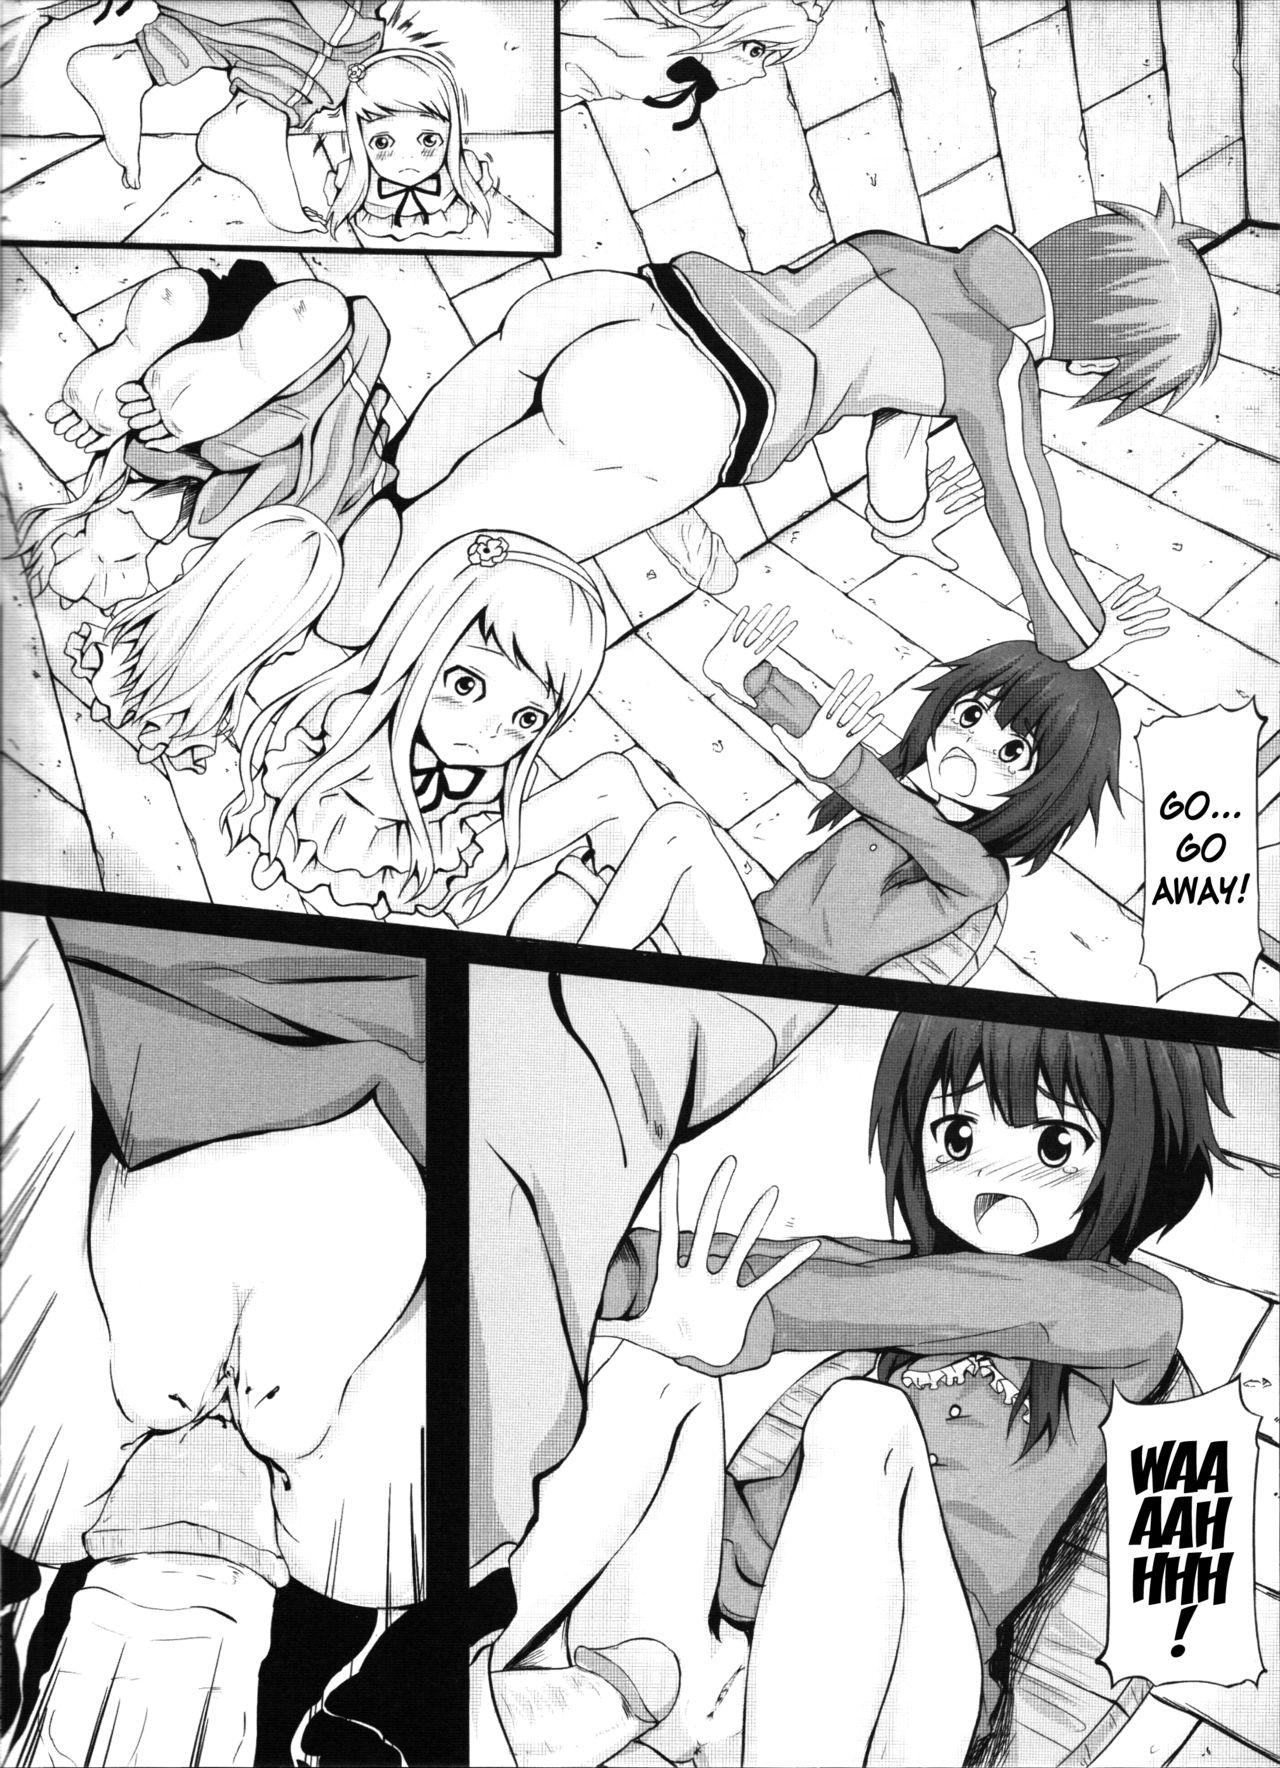 Giving ○○ to Megumin in the Toilet! 4